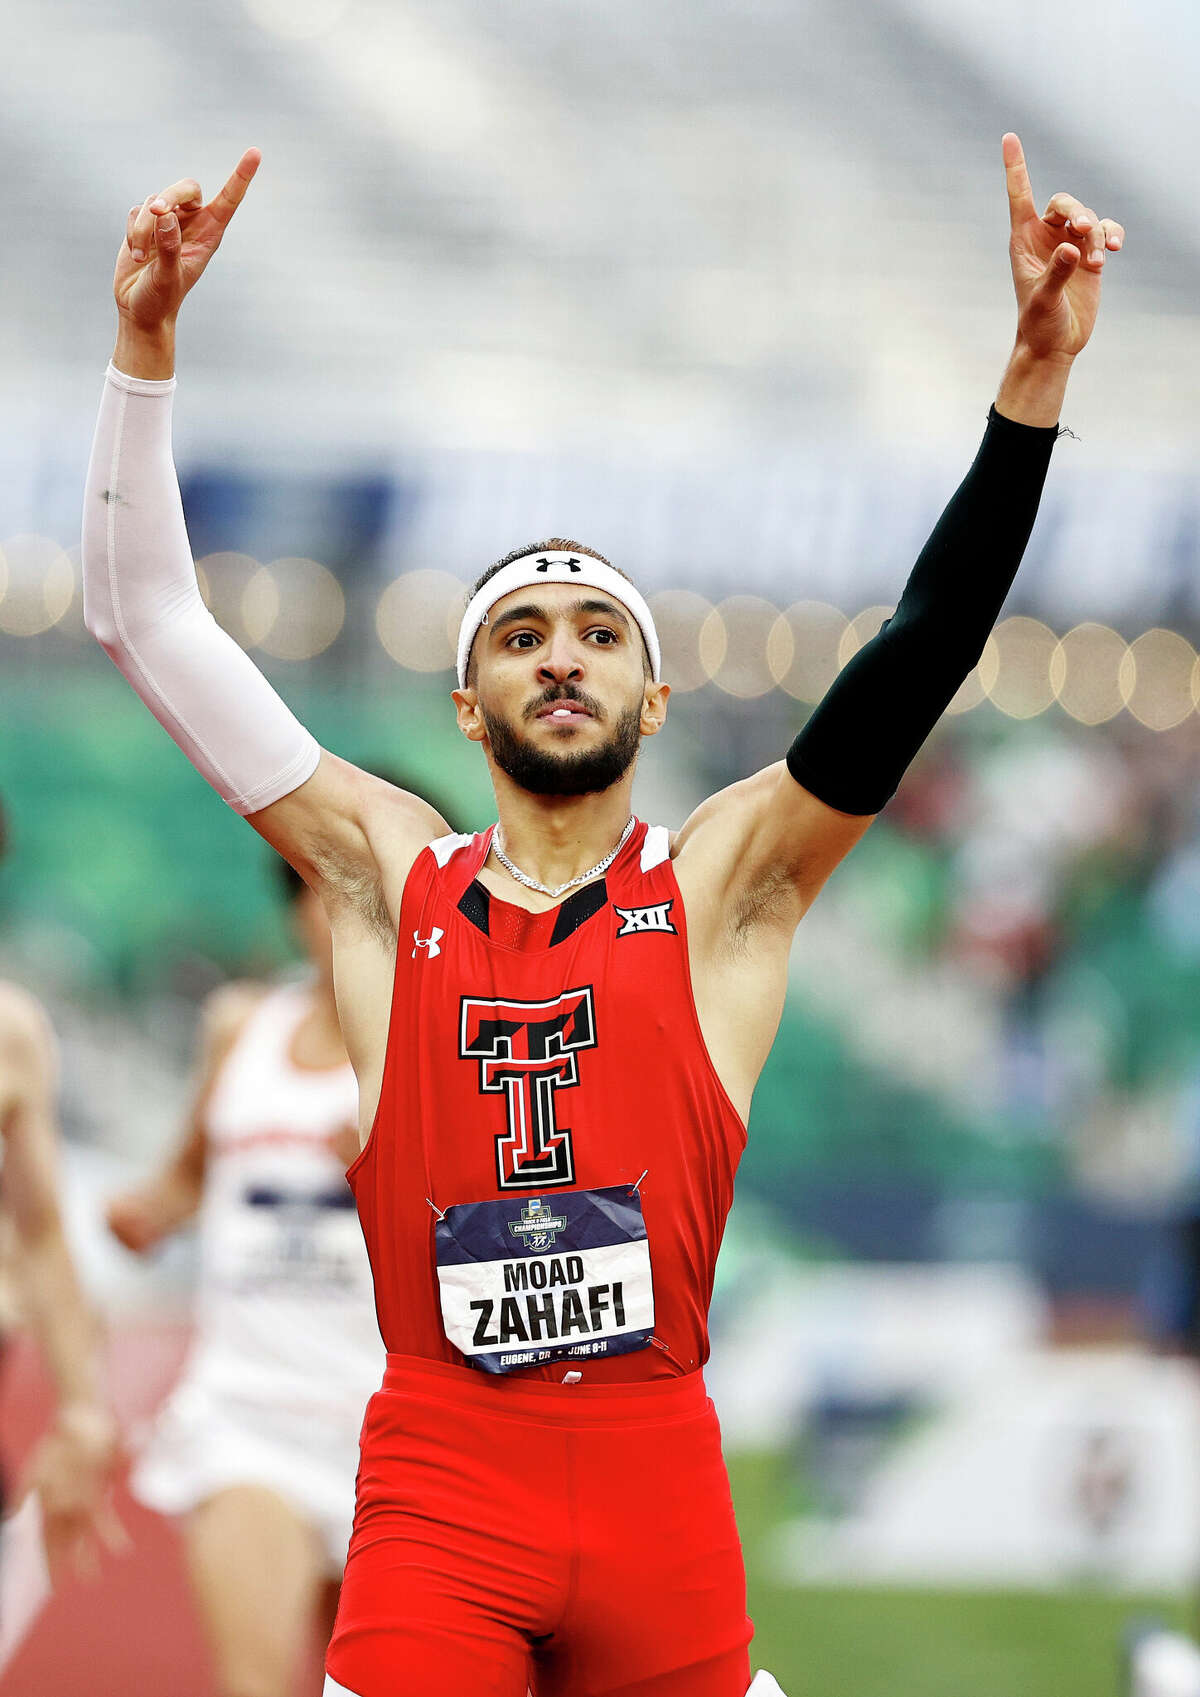 EUGENE, OREGON - JUNE 10: Moad Zahafi of Texas Tech reacts after winning the 800 meter final during the NCAA Division I Men's and Women's Outdoor Track & Field Championships at Hayward Field on June 10, 2022 in Eugene, Oregon. (Photo by Steph Chambers/Getty Images)